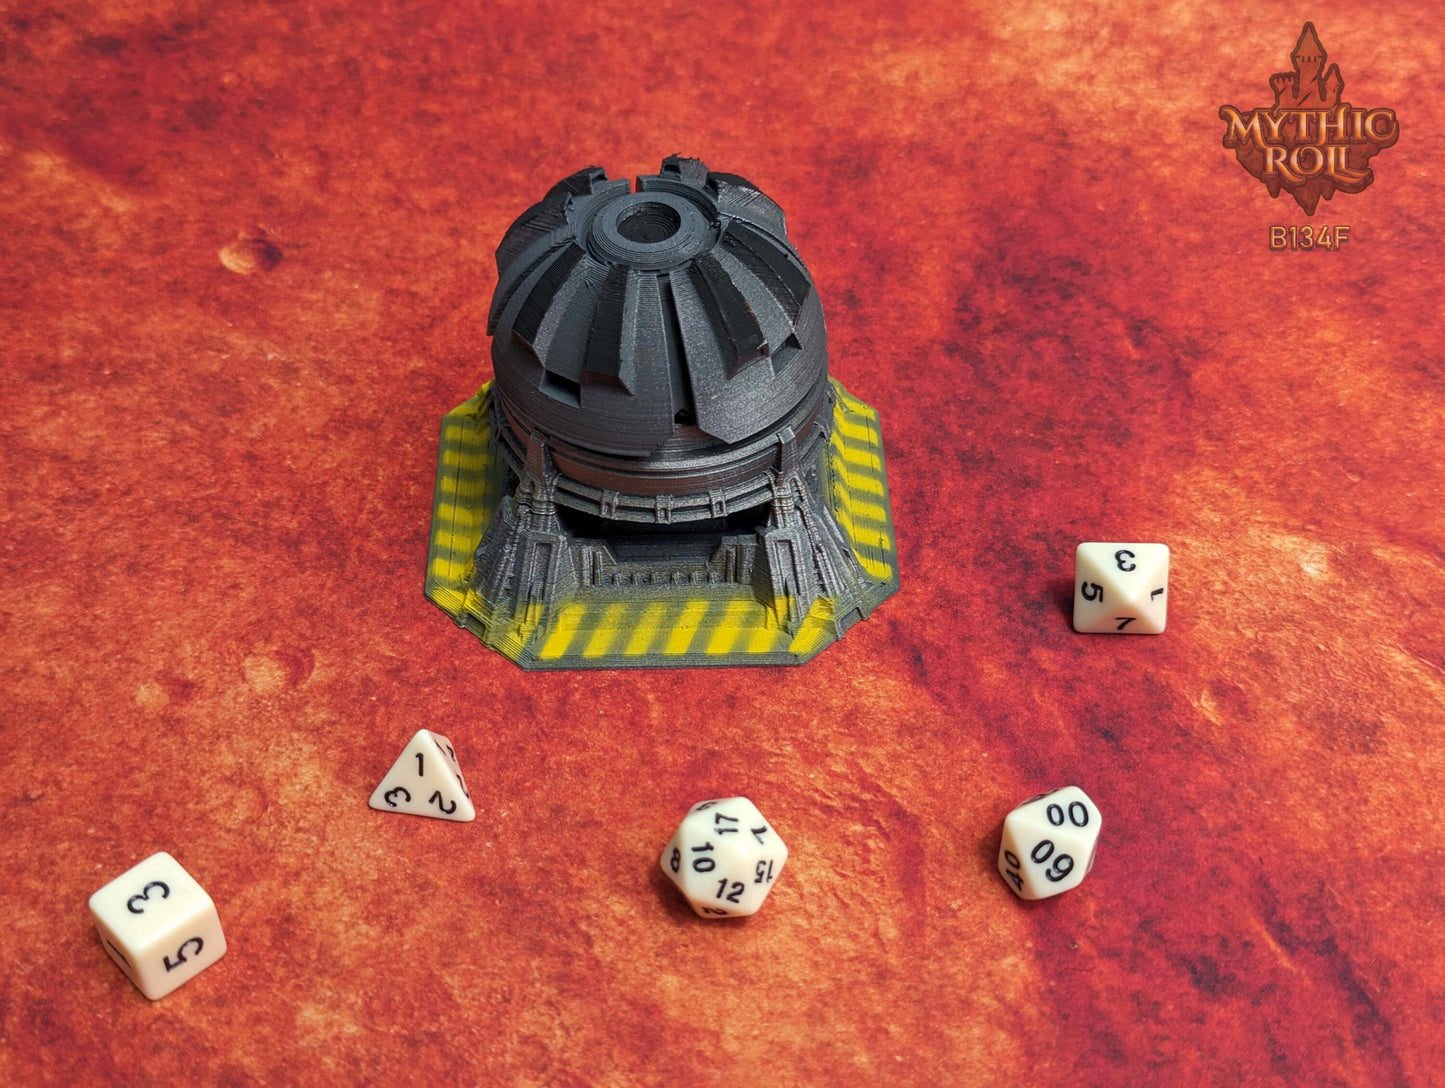 Space Pod 3D Printed Cyberpunk Dice Vault - Mythic Roll Collection by Unchained Games | RPG Dice Jail | D20 Dice Box | -Your Odyssey Awaits!